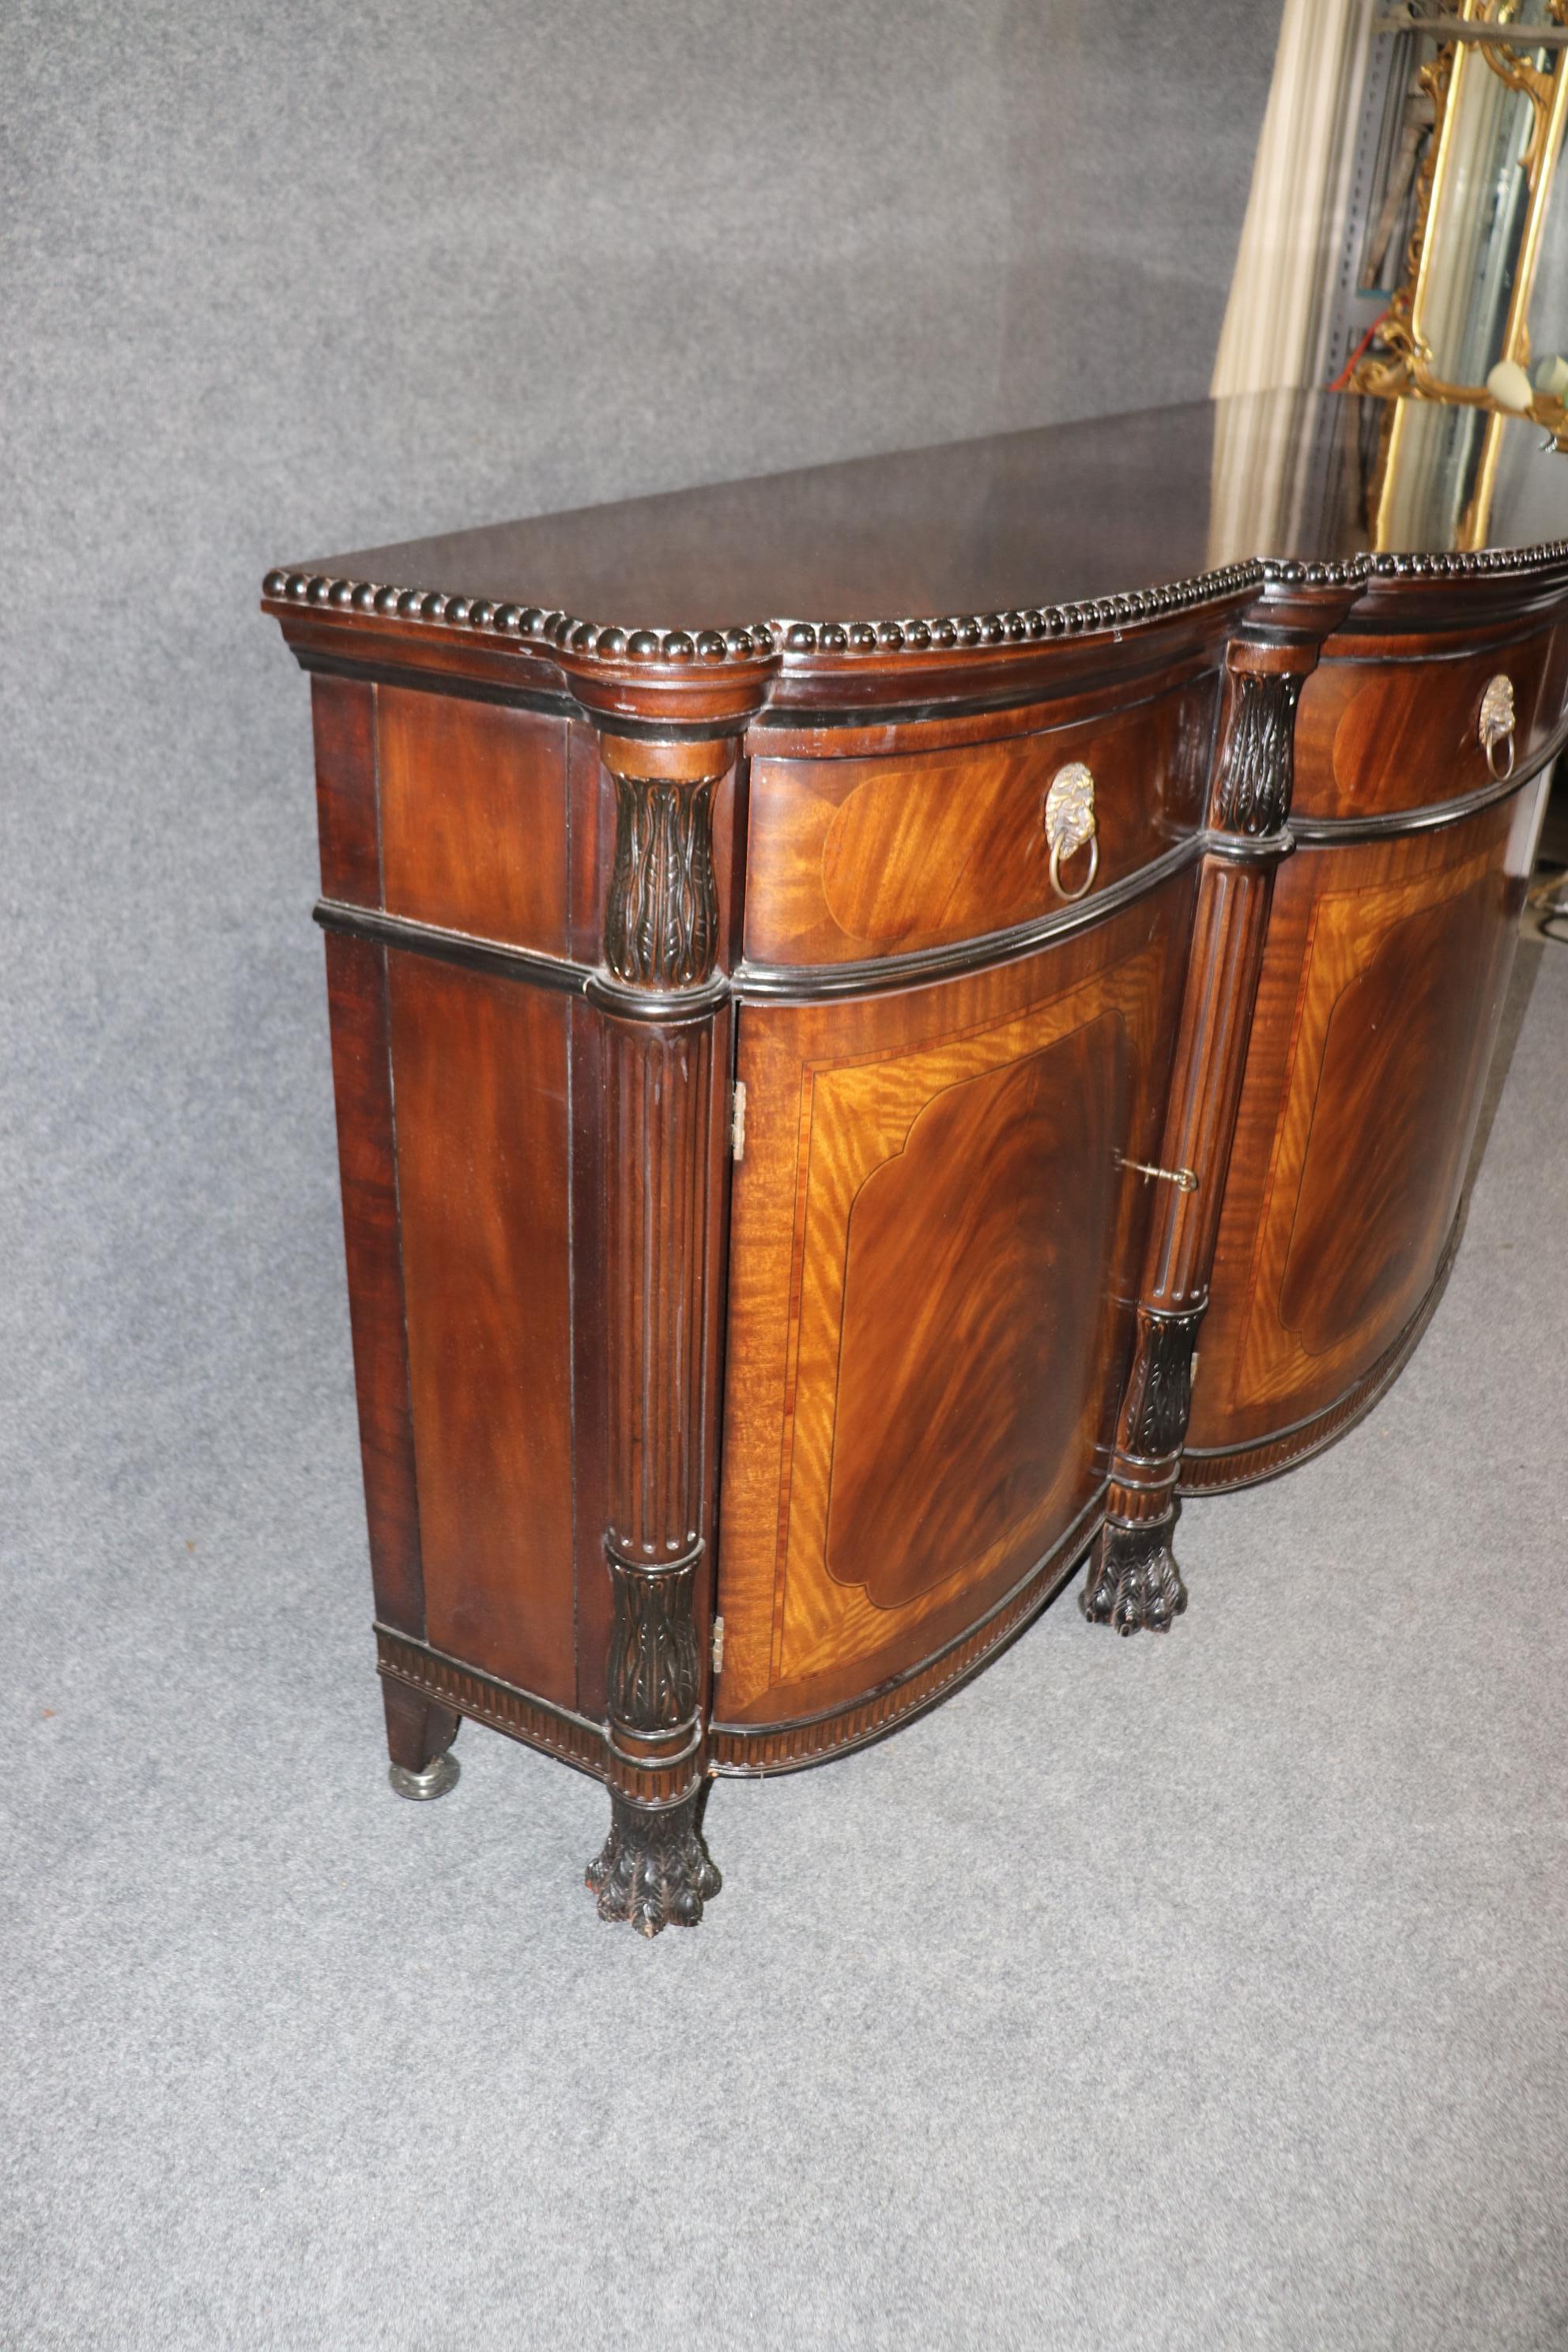 Extraordinary Grand Carved Flame Mahogany Georgian E.J. Victor Sideboard Server In Good Condition For Sale In Swedesboro, NJ